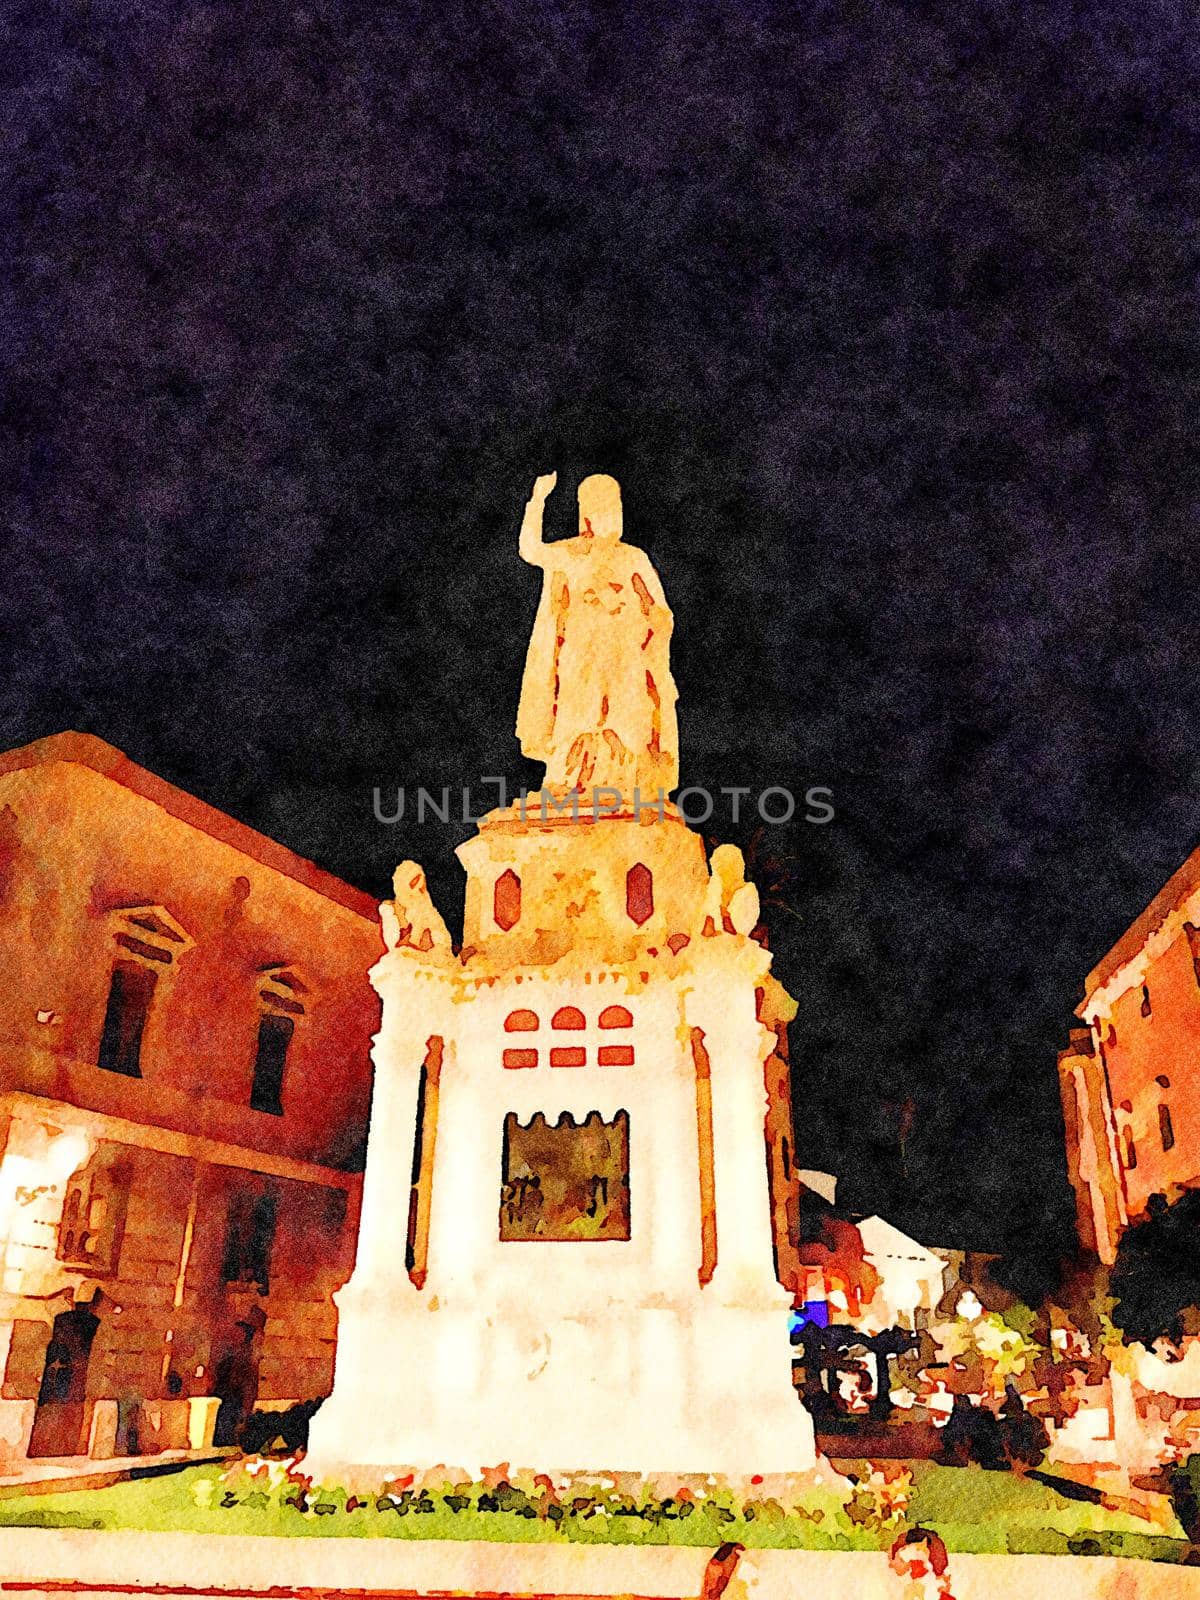 The statue in one of the squares of Oristano a town in Sardinia in Italy. Digital color painting.